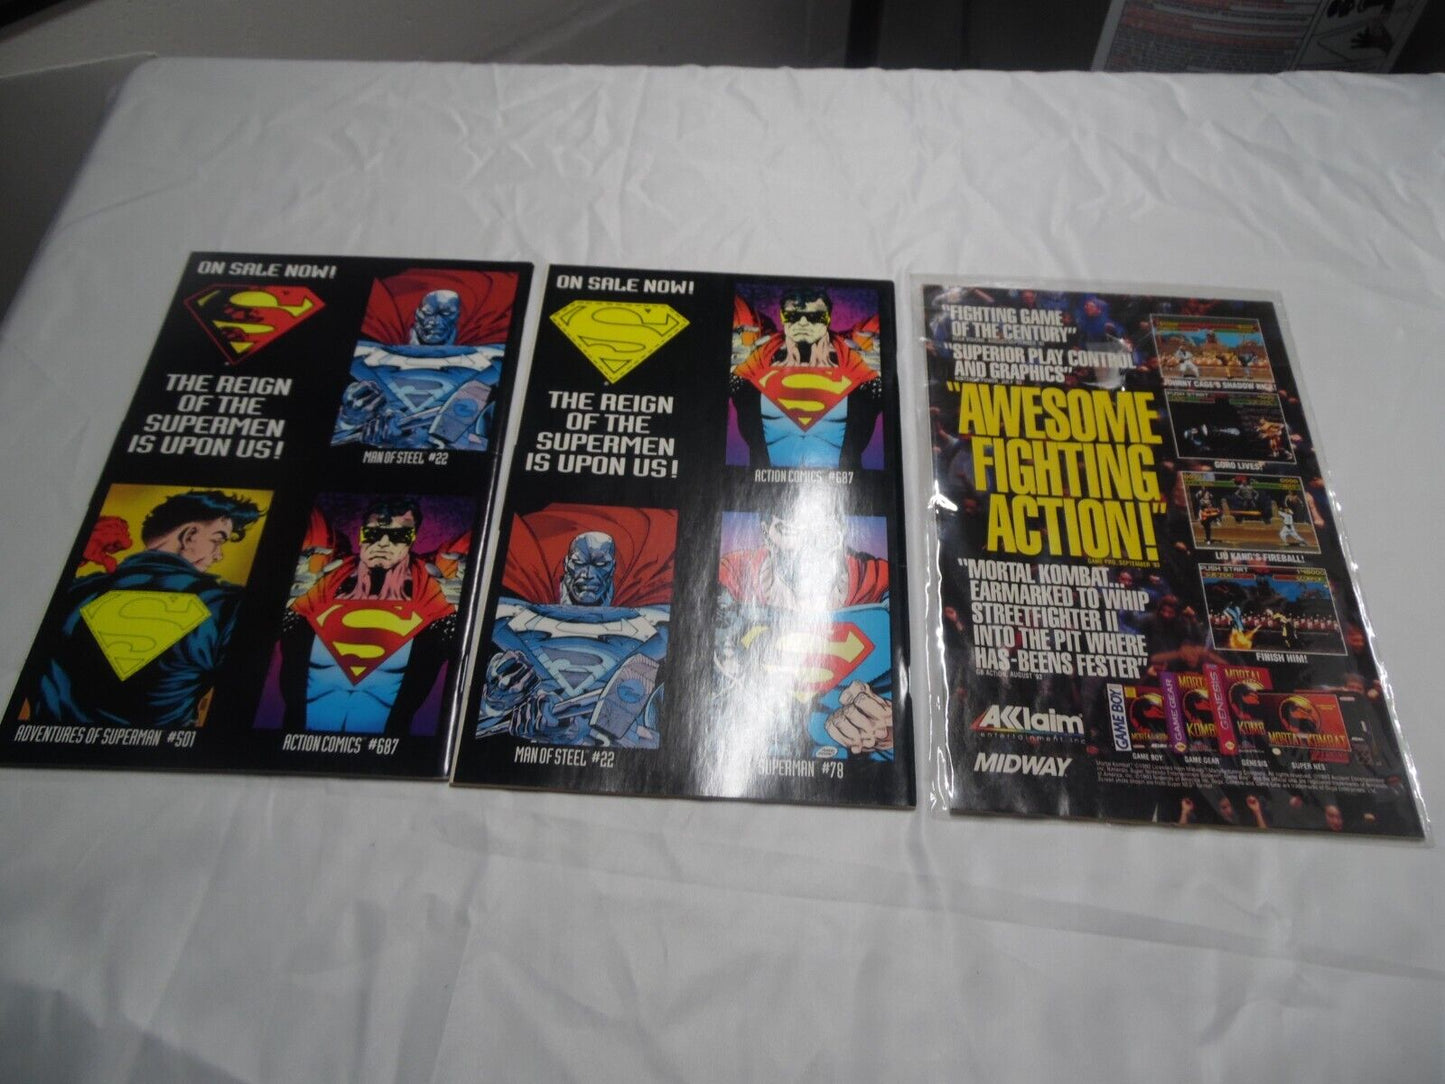 Lot of 3 Comic Books - DC Reign Of The Supermen & The Adventures of Superman